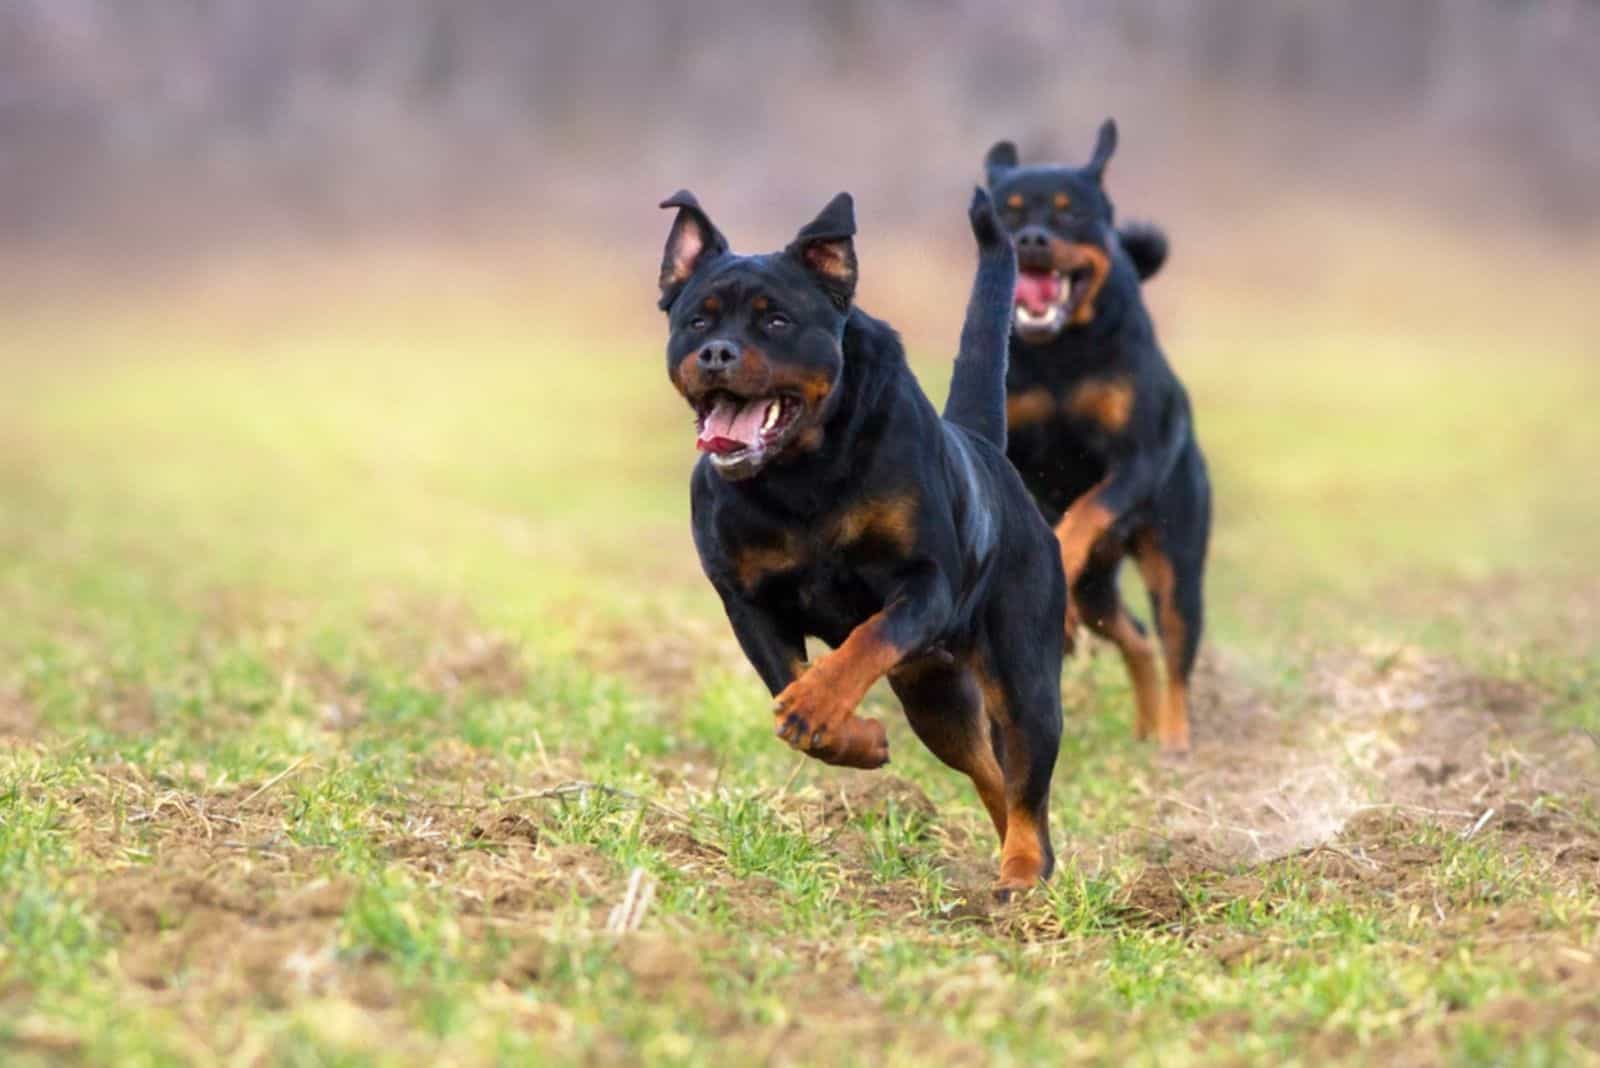 Two rottweiler play in autumn park